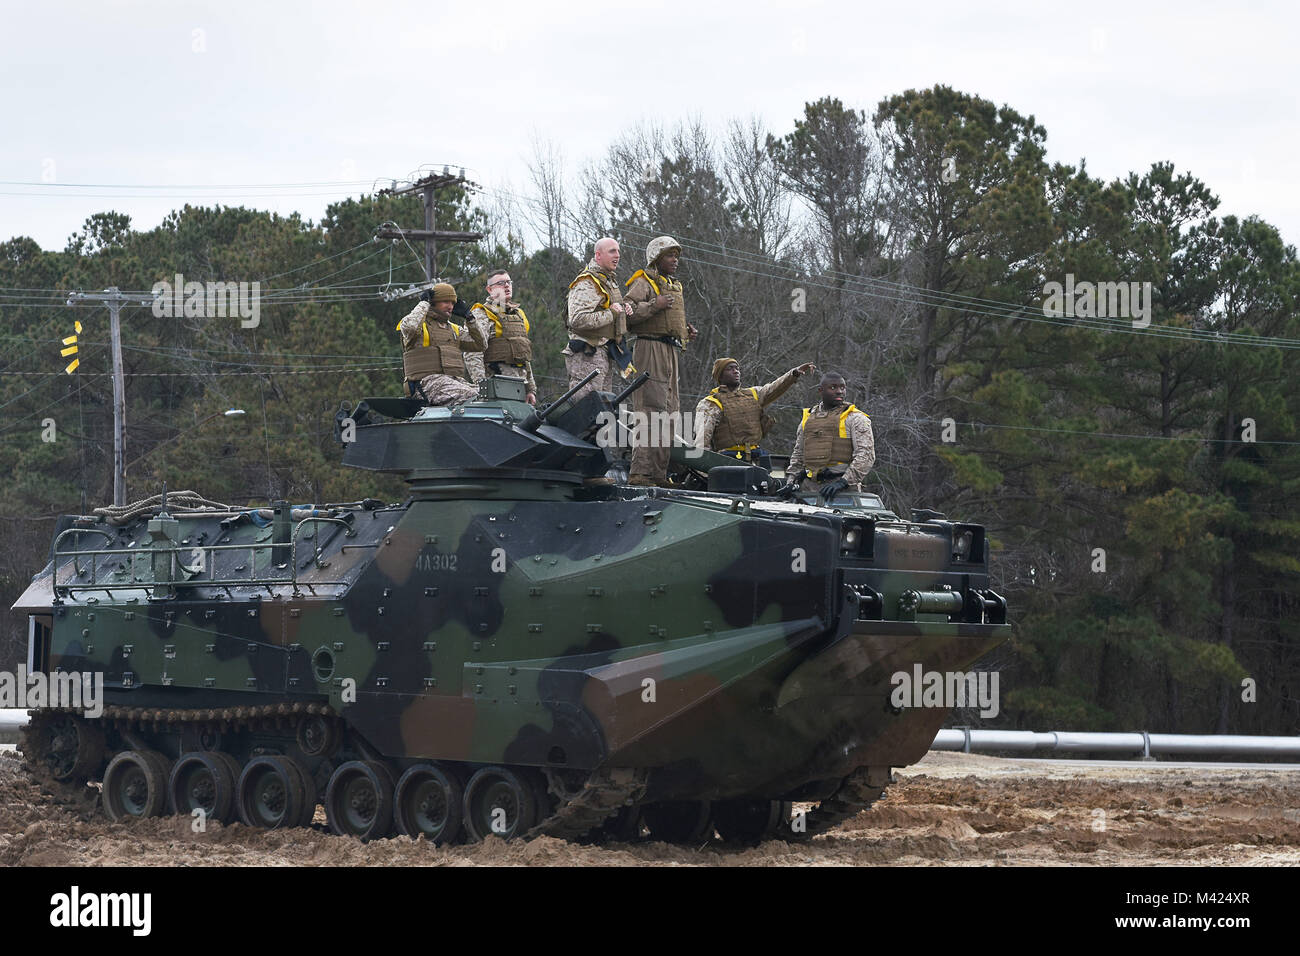 180210-N-FF140-002 NORFOLK, Va., (Feb. 10, 2018) -- Marines assigned to 4th Marine Division, 1st Platoon, observe a simulated recovery mission while standing on an amphibious assault vehicle during a training exercise at Joint Expeditionary Base Little Creek. The semi-annual exercise supports the division's mission to provide trained combat support personnel to augment the active component in time of war or national emergency. (U.S. Navy photo by Mass Communication Specialist 2nd Class Jacob D. Galito/Released) Stock Photo